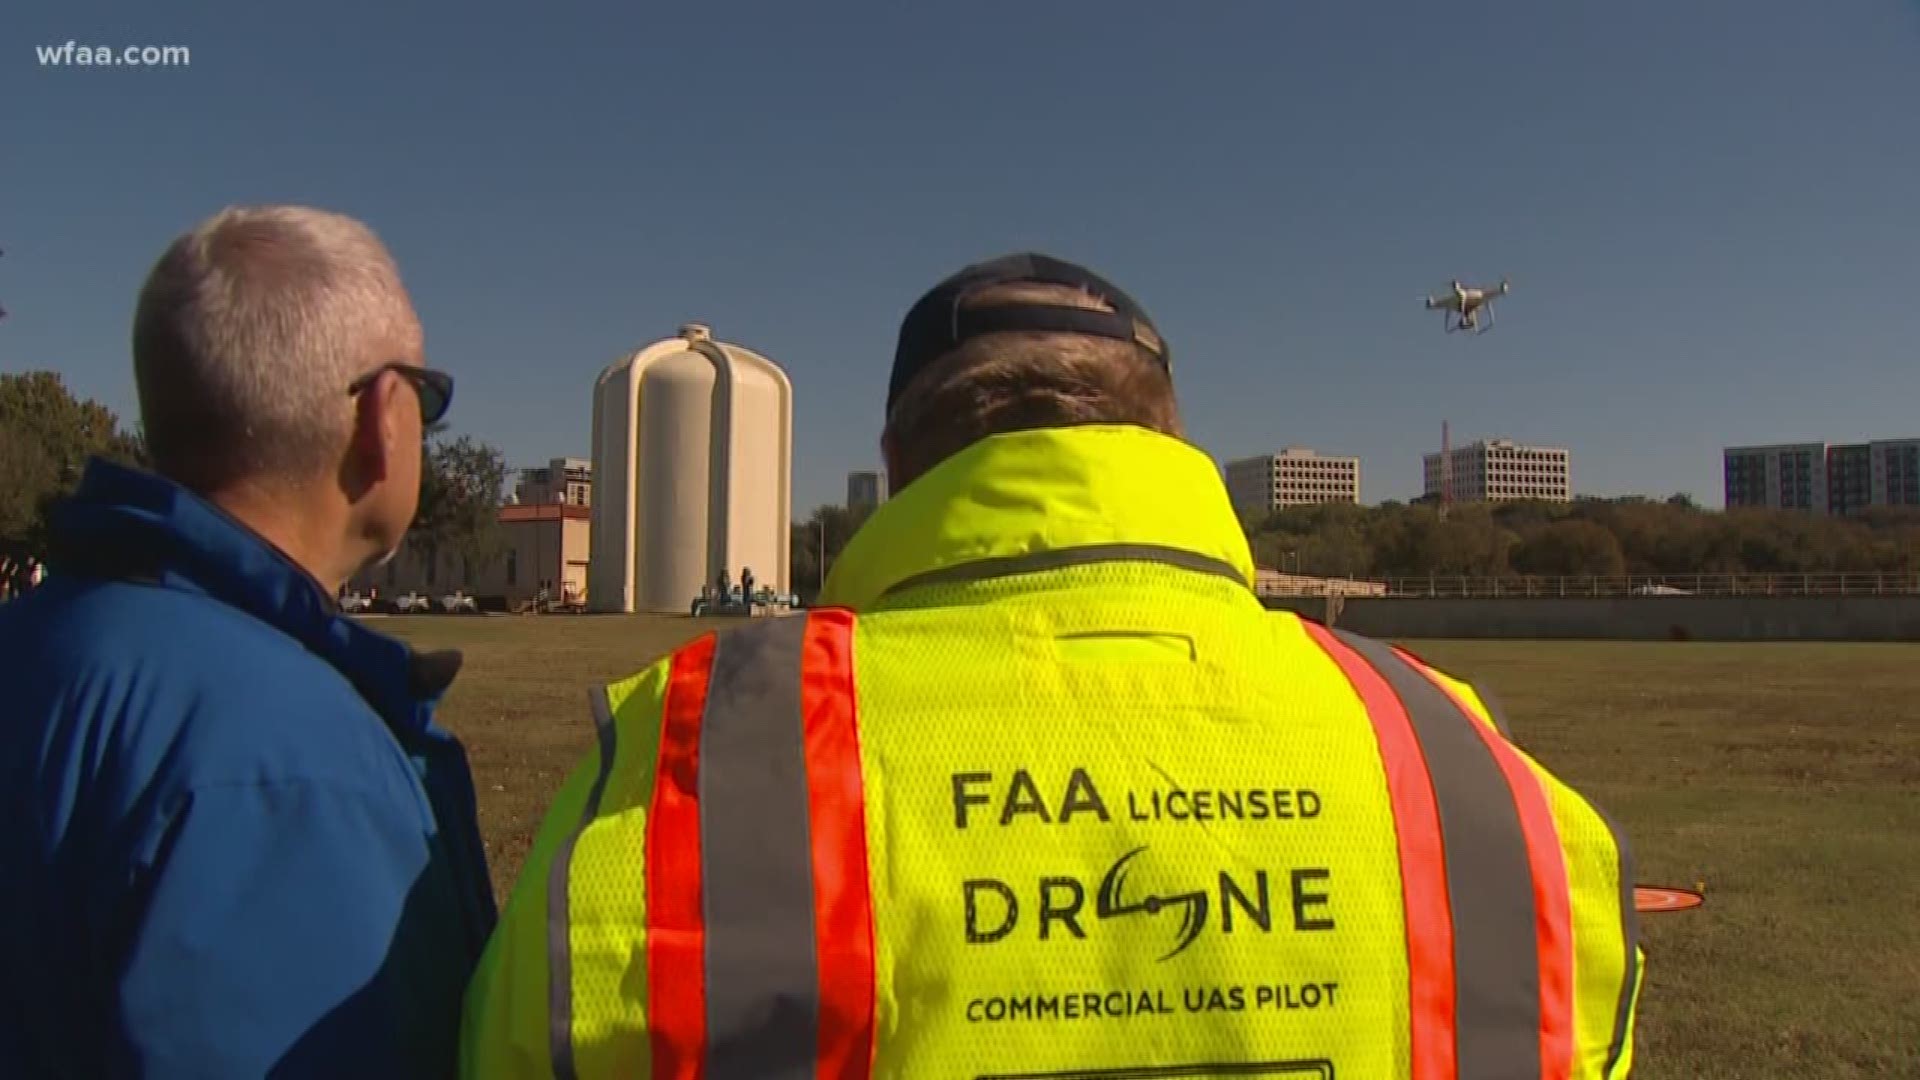 The city's water department is using drones to access low-lying areas during flooding.